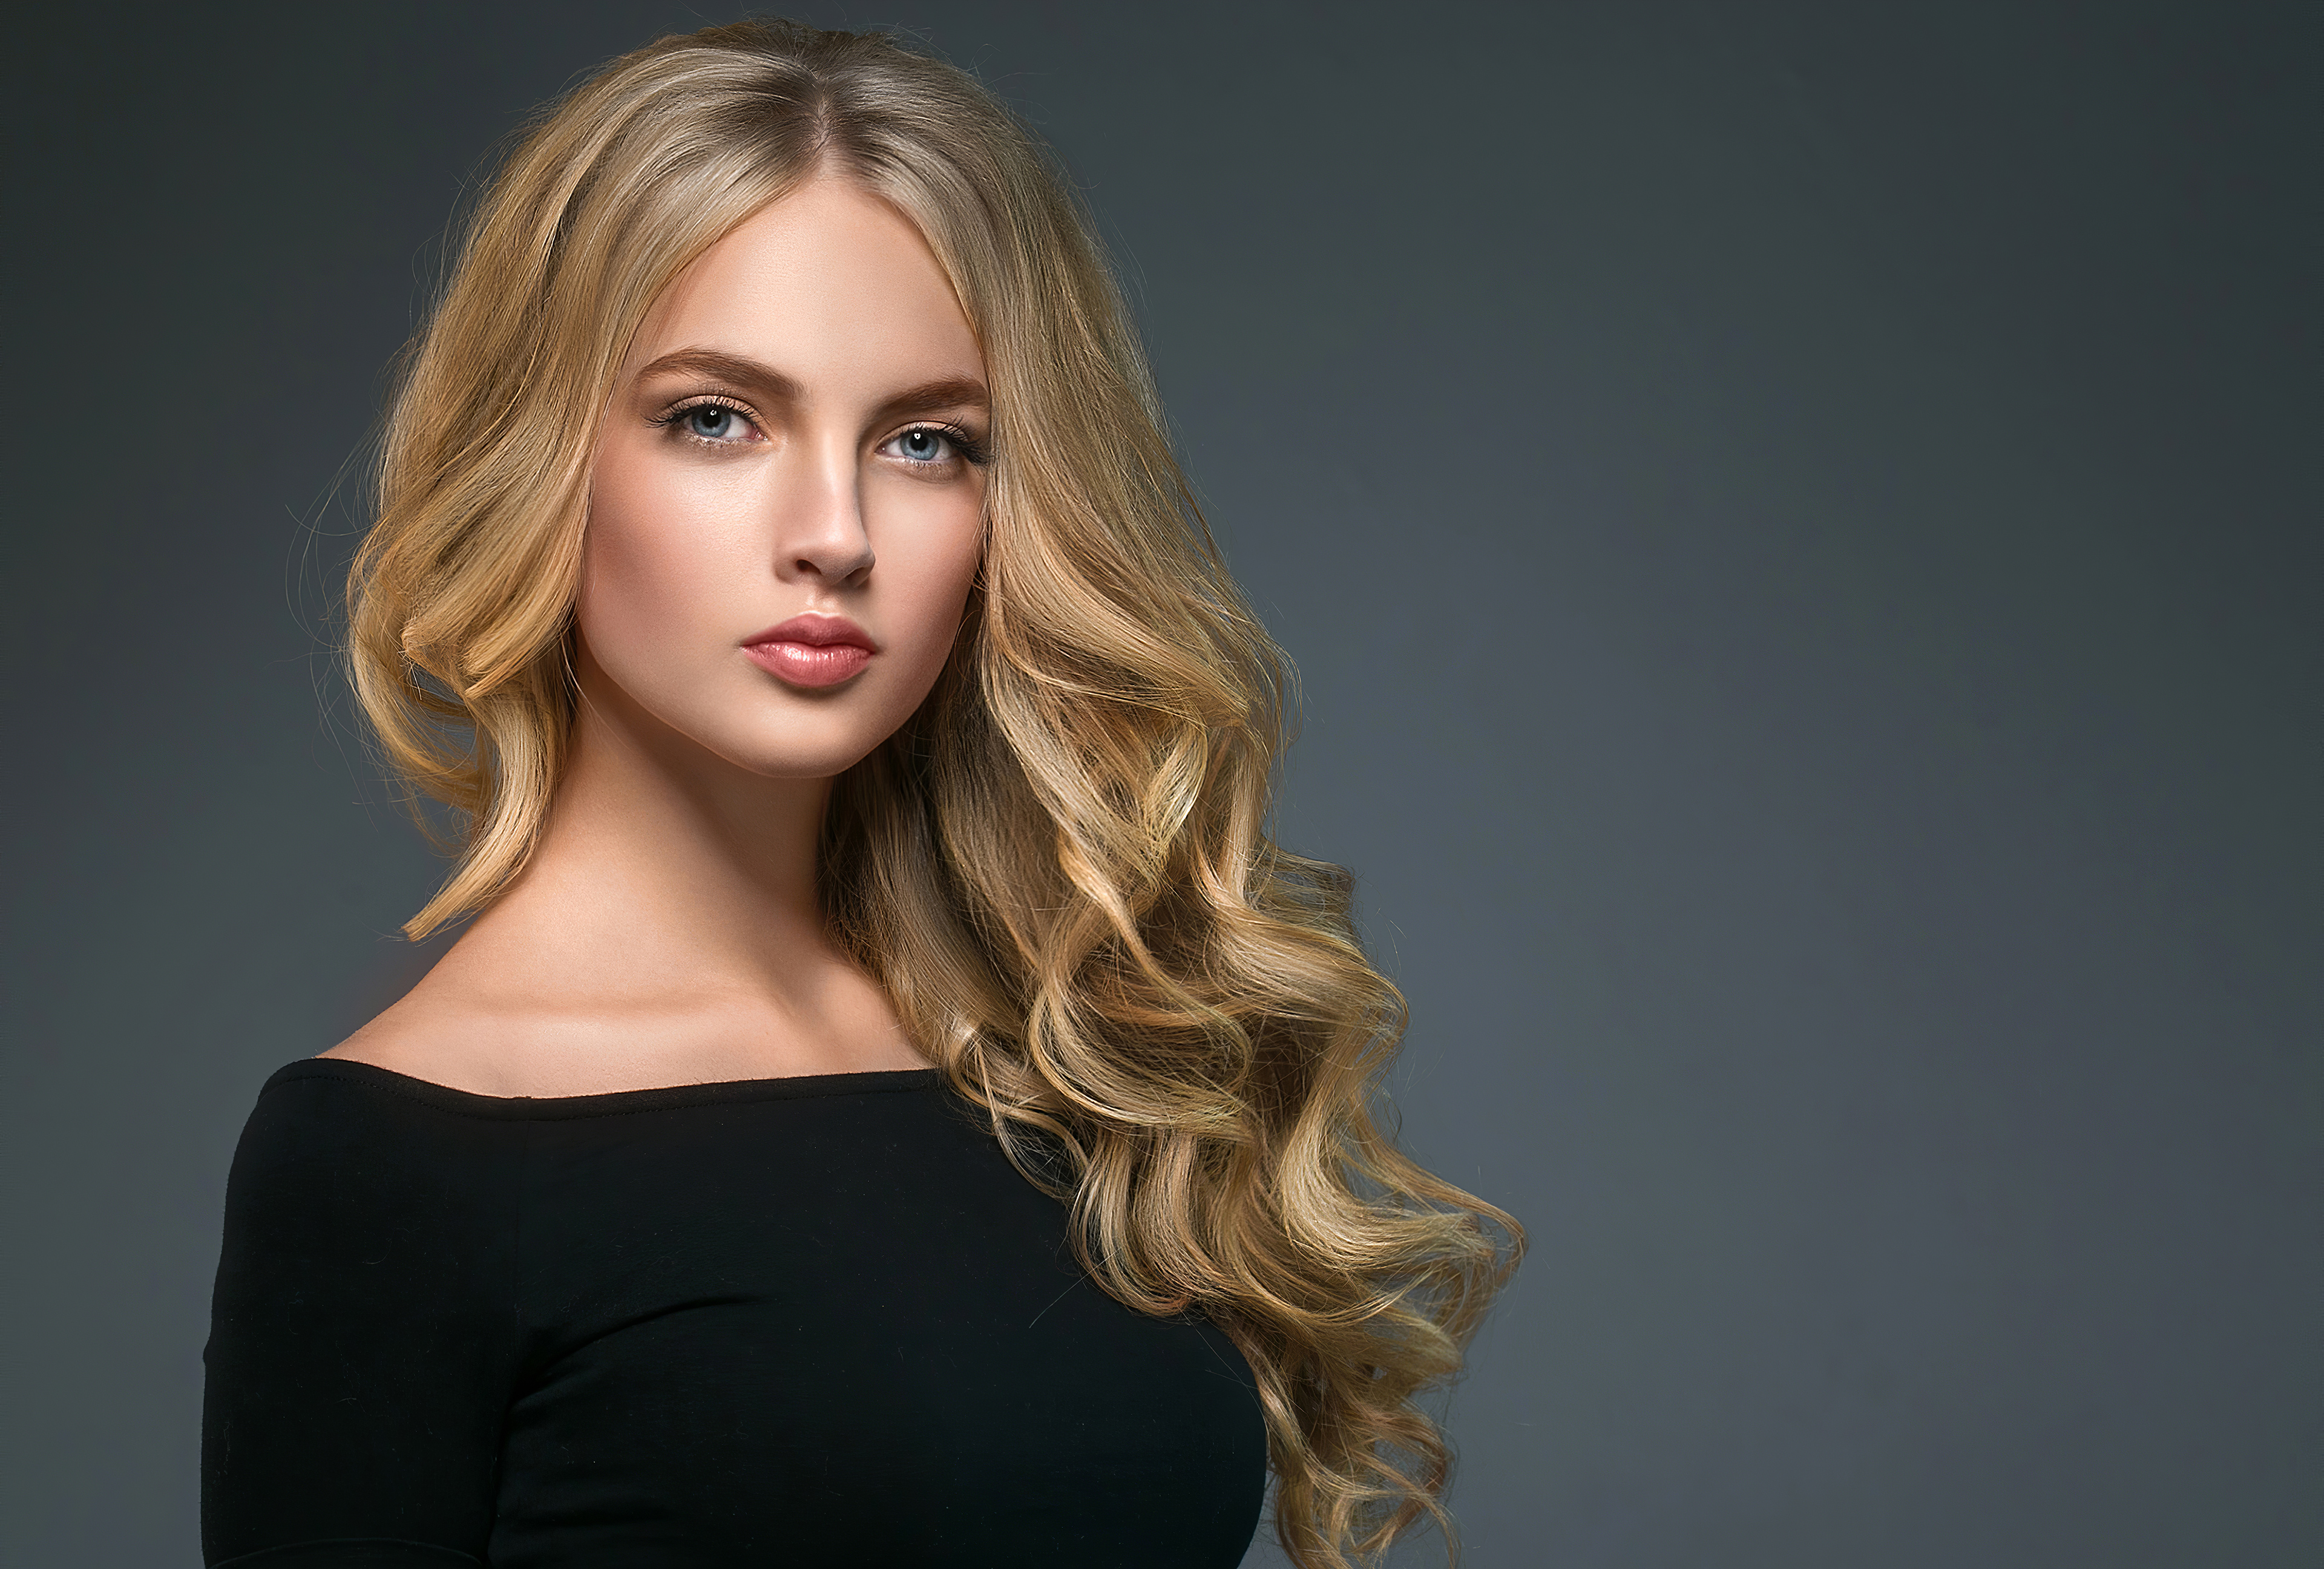 Girl Blonde Hair Glance 4k 1366x768 Resolution HD 4k Wallpaper, Image, Background, Photo and Picture